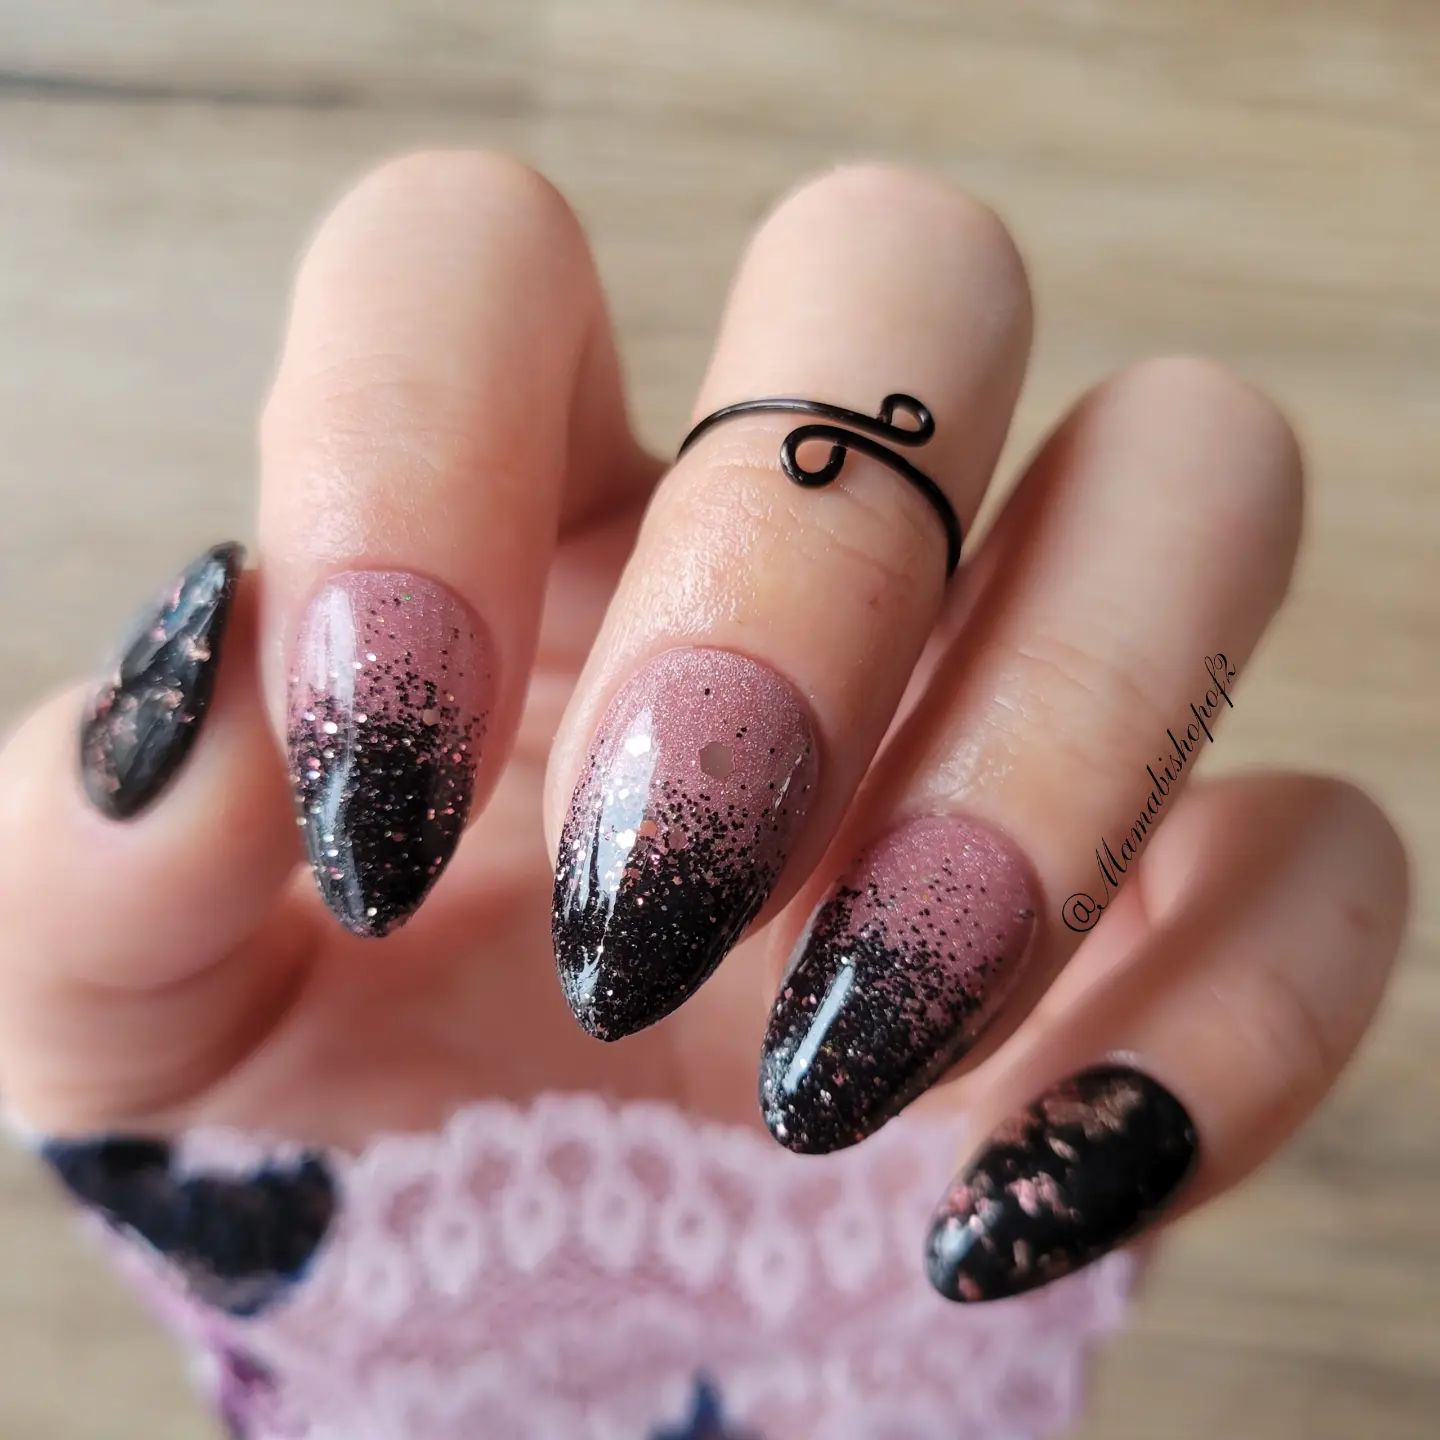 Black Glitter Nails: 50+ Gorgeous Ideas To Inspire Your Next Manicure